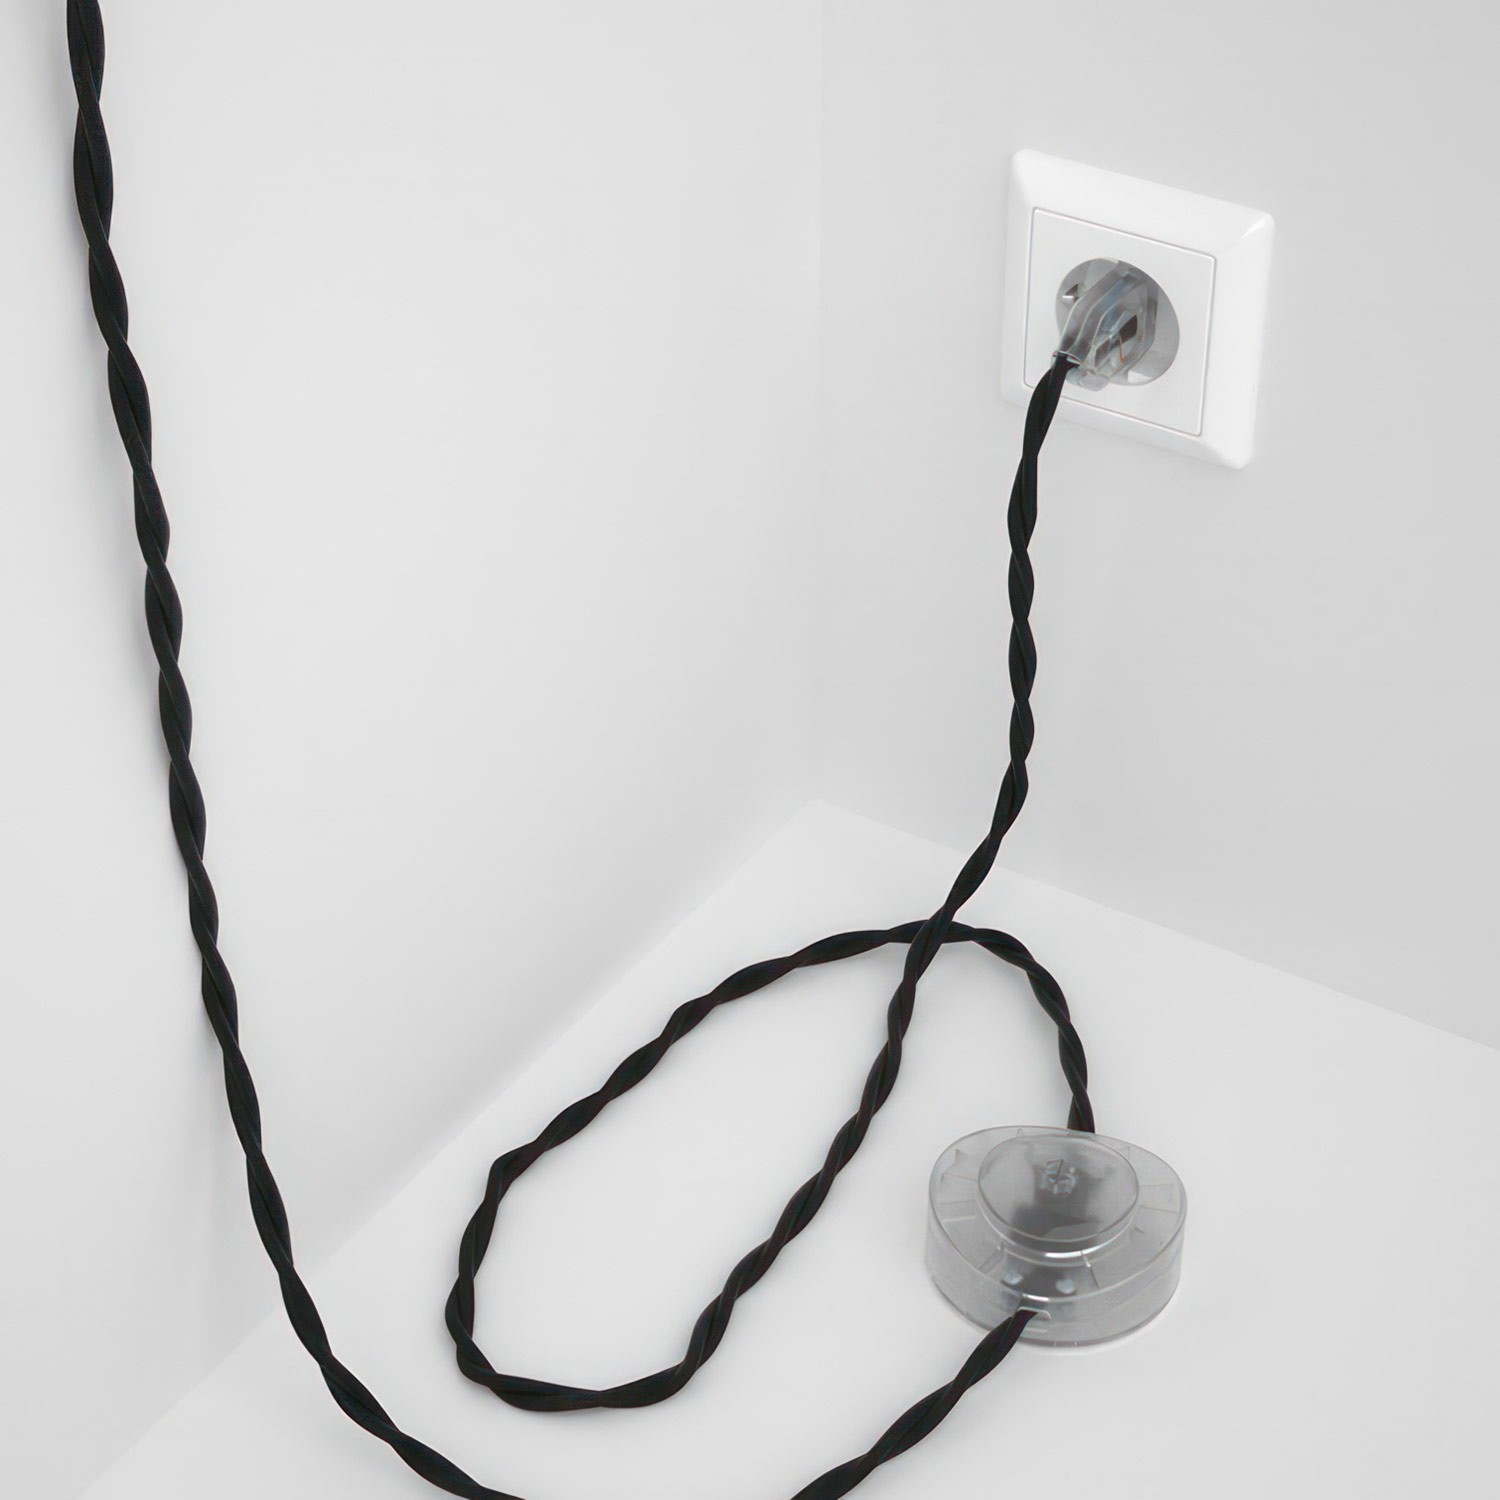 Wiring Pedestal, TC04 Black Cotton 3 m. Choose the colour of the switch and plug.